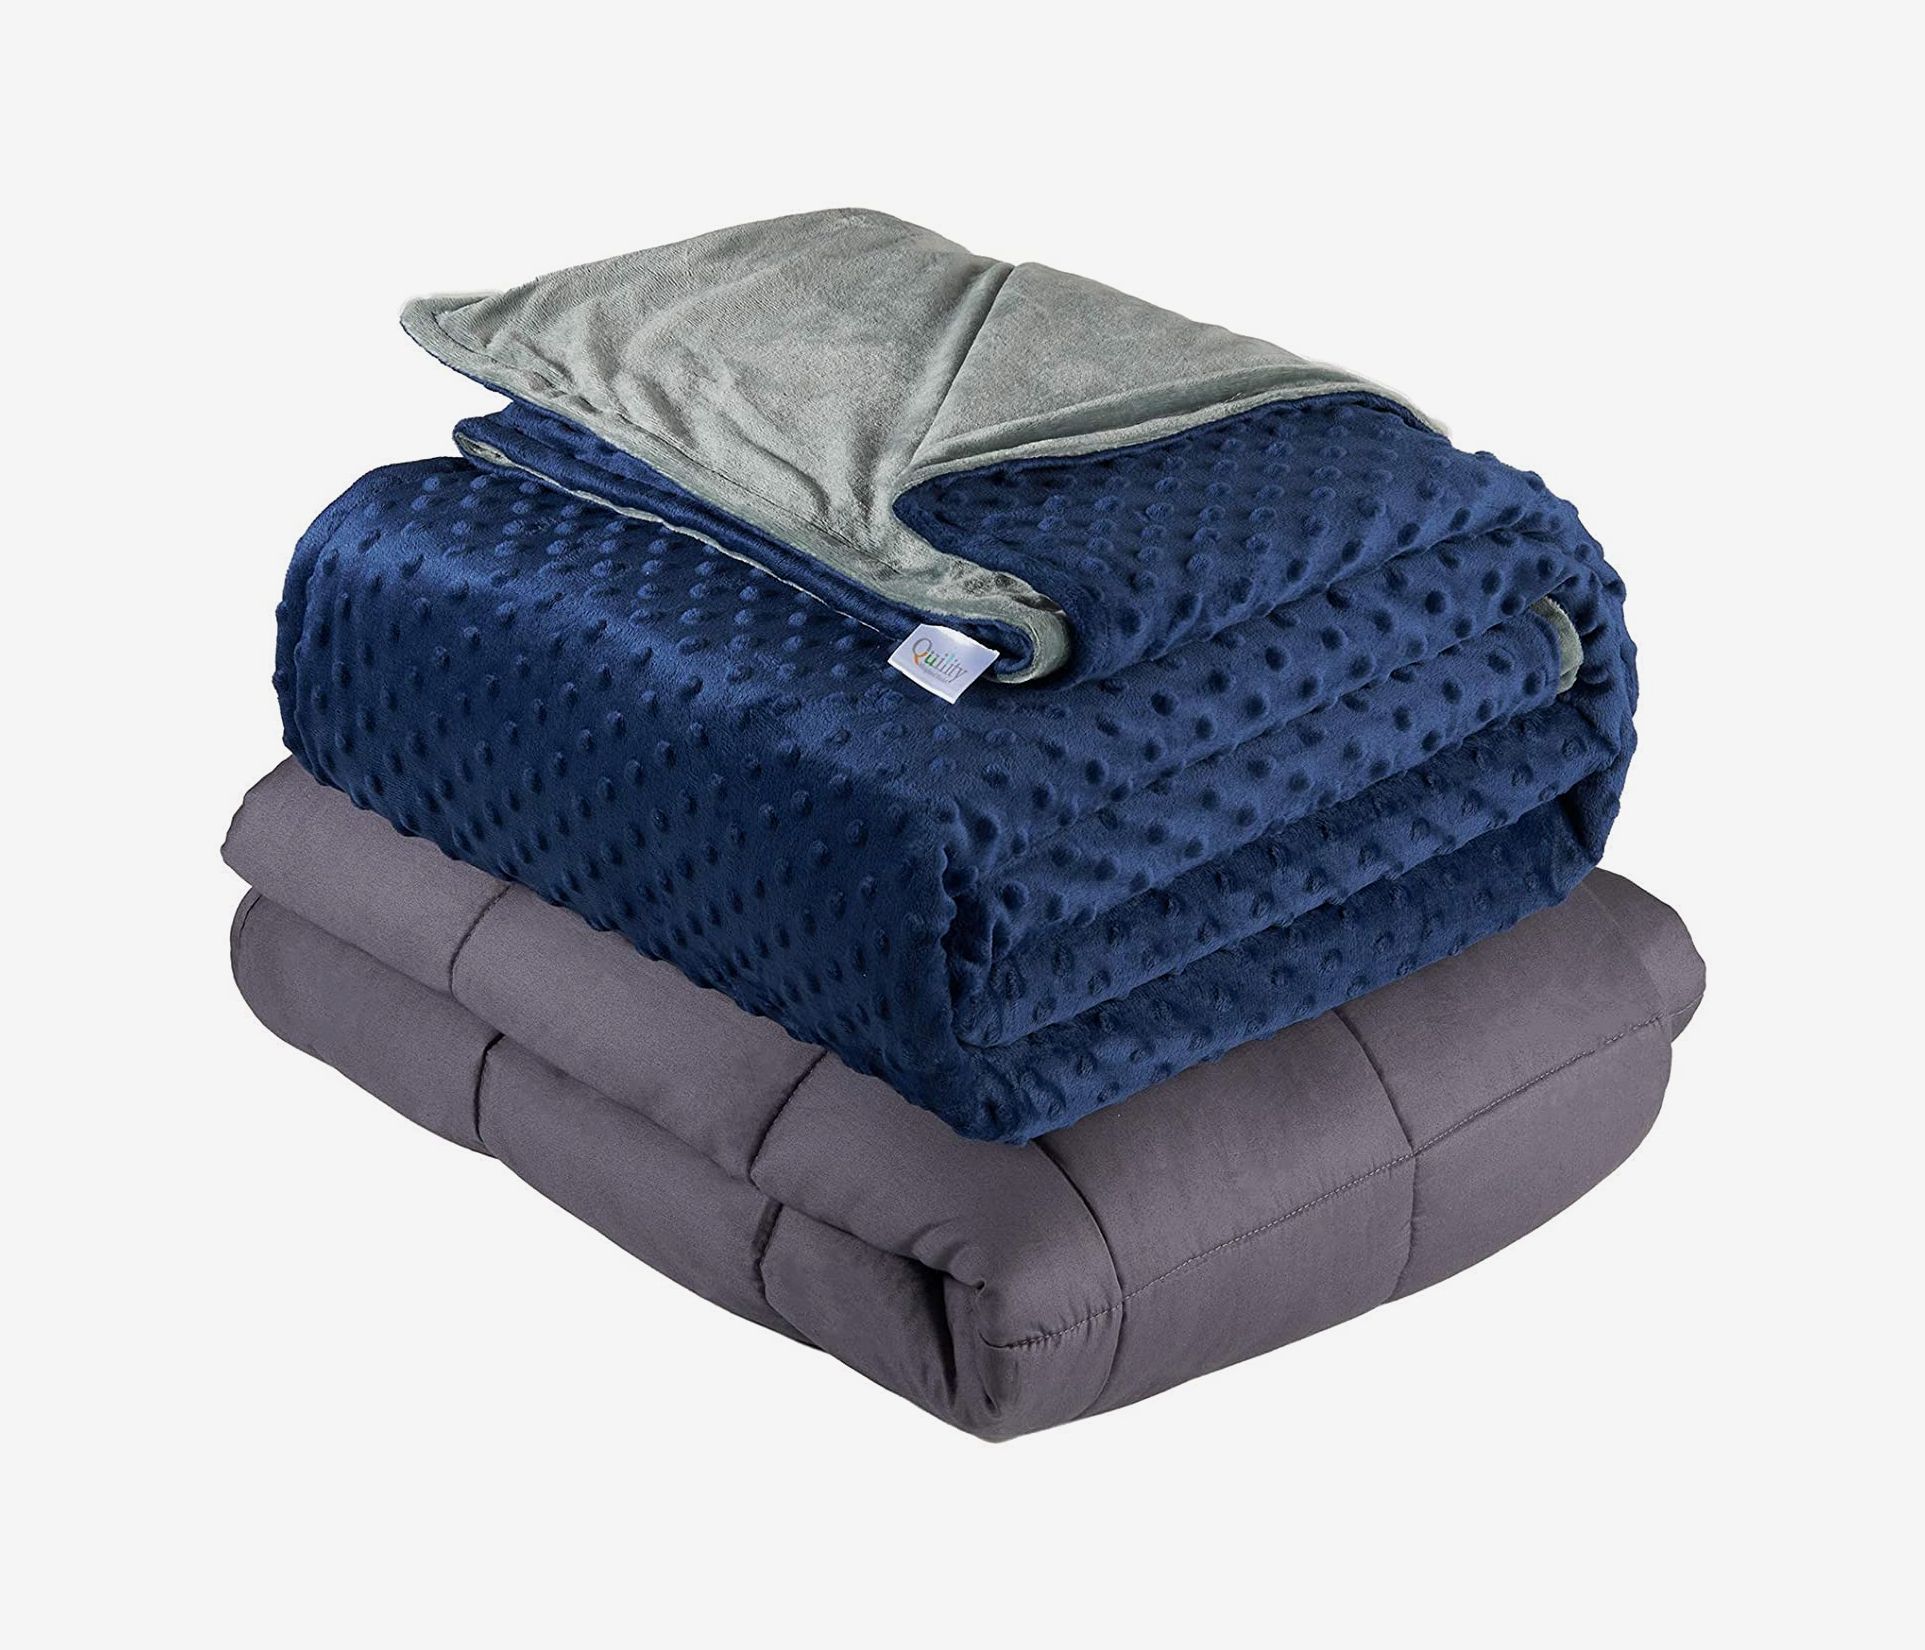 15 Best Weighted Blankets 2021 The, Best Weighted Blanket For Queen Size Bed